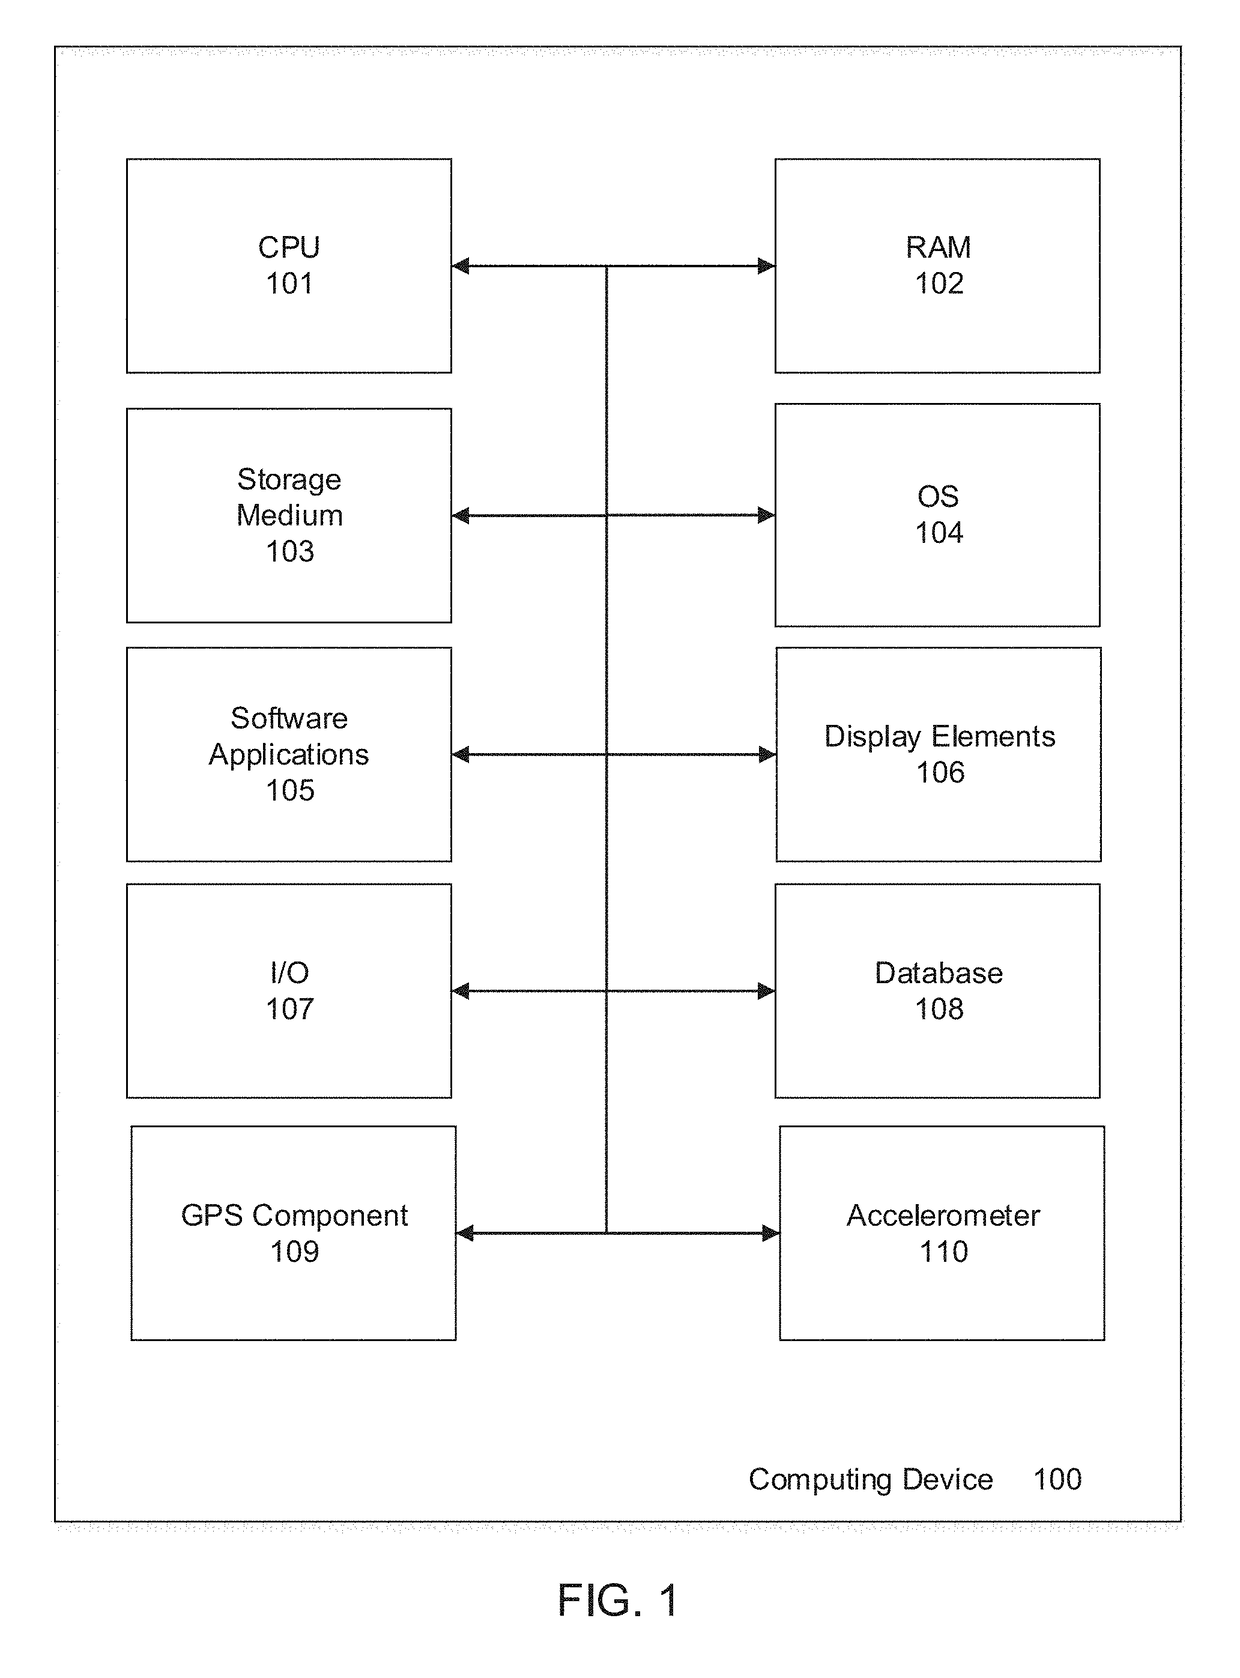 Method and System for On-Demand Customized Services